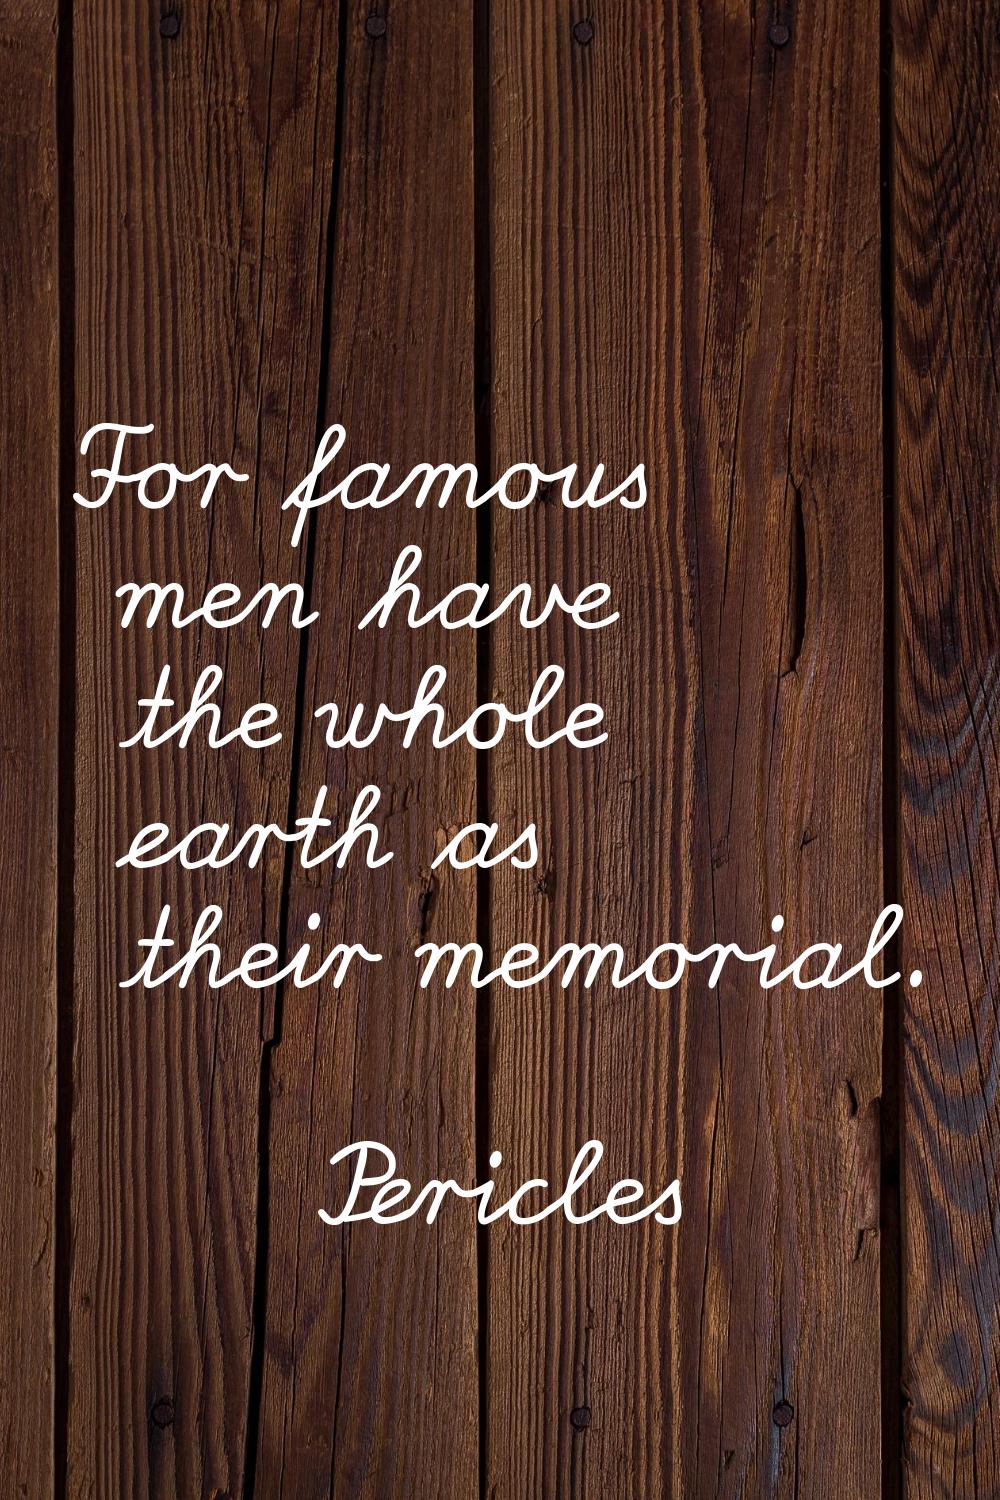 For famous men have the whole earth as their memorial.